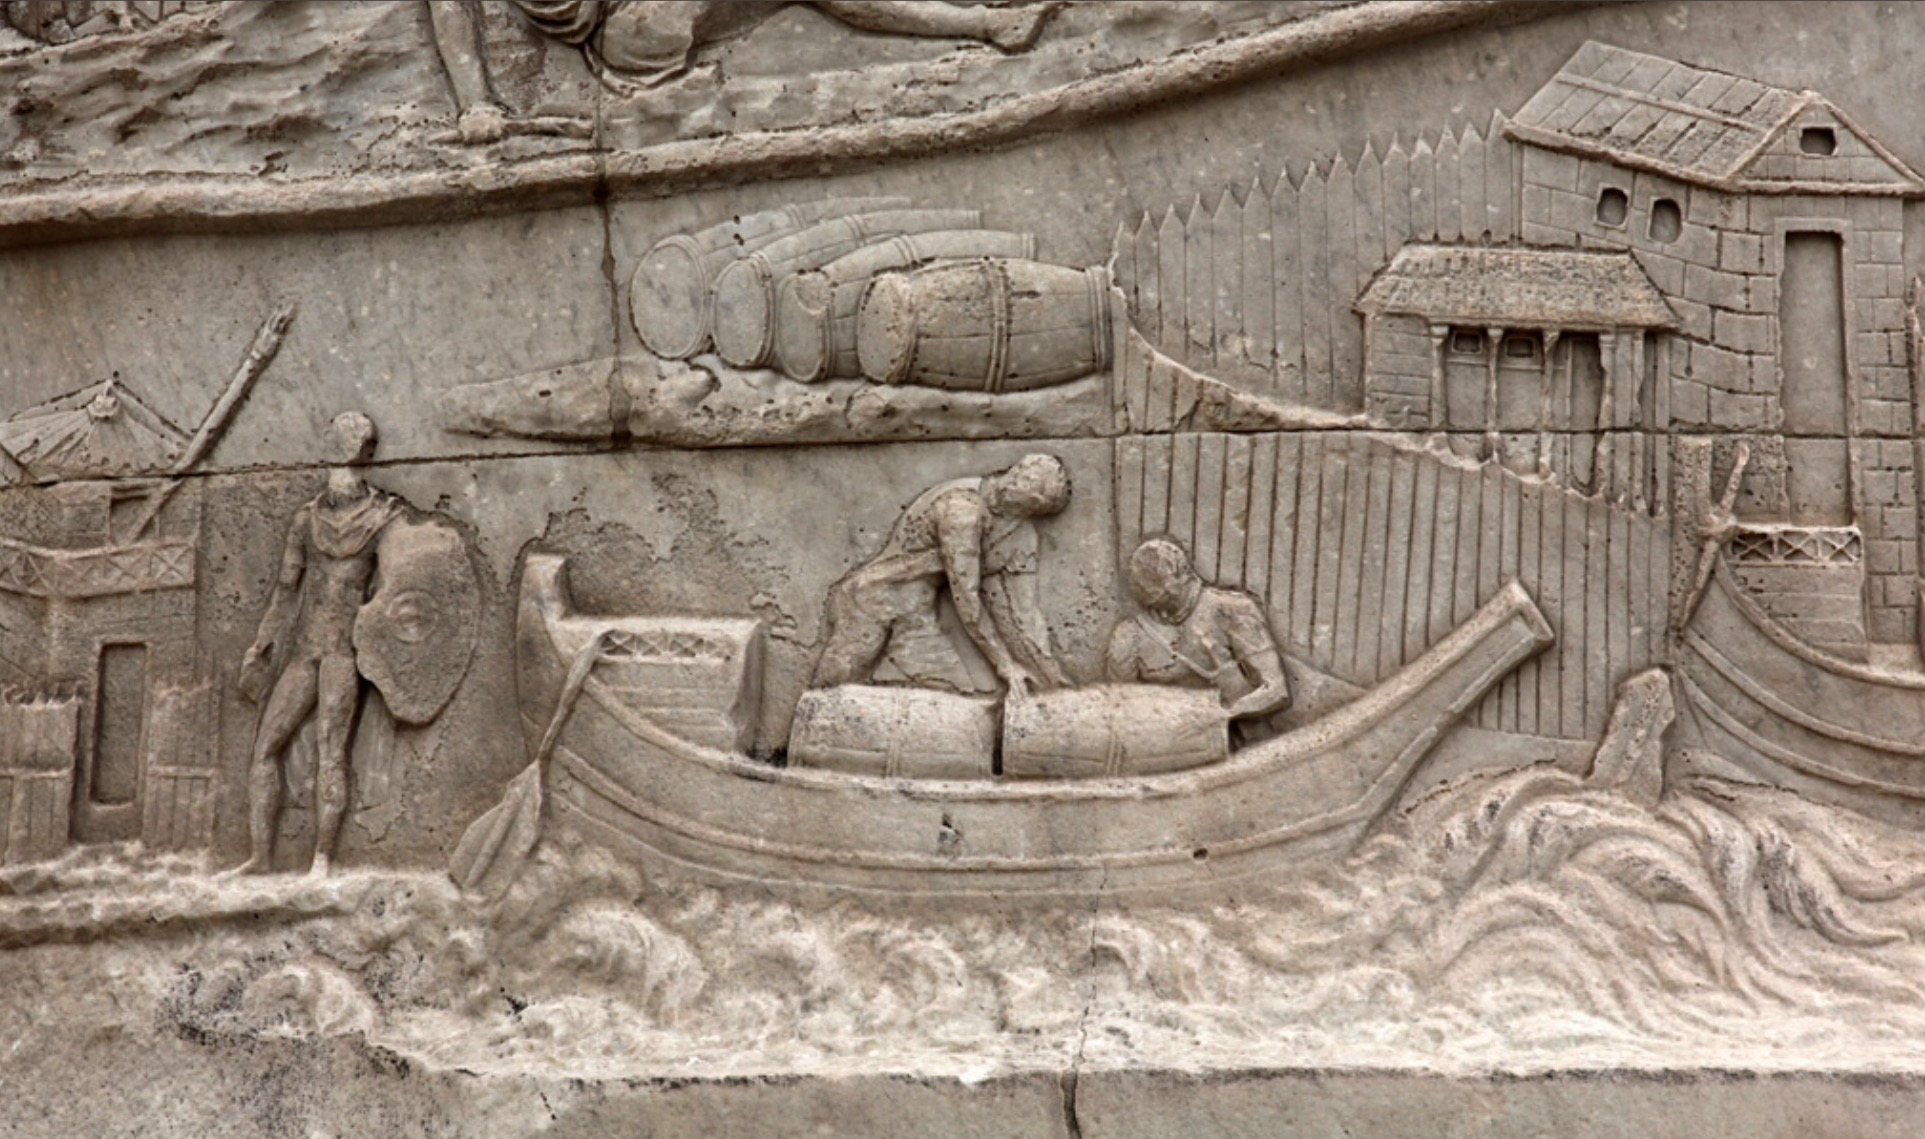 Loading barrels on a boat in the Danube, Trajan's Column in Rome, completed 113 AD.